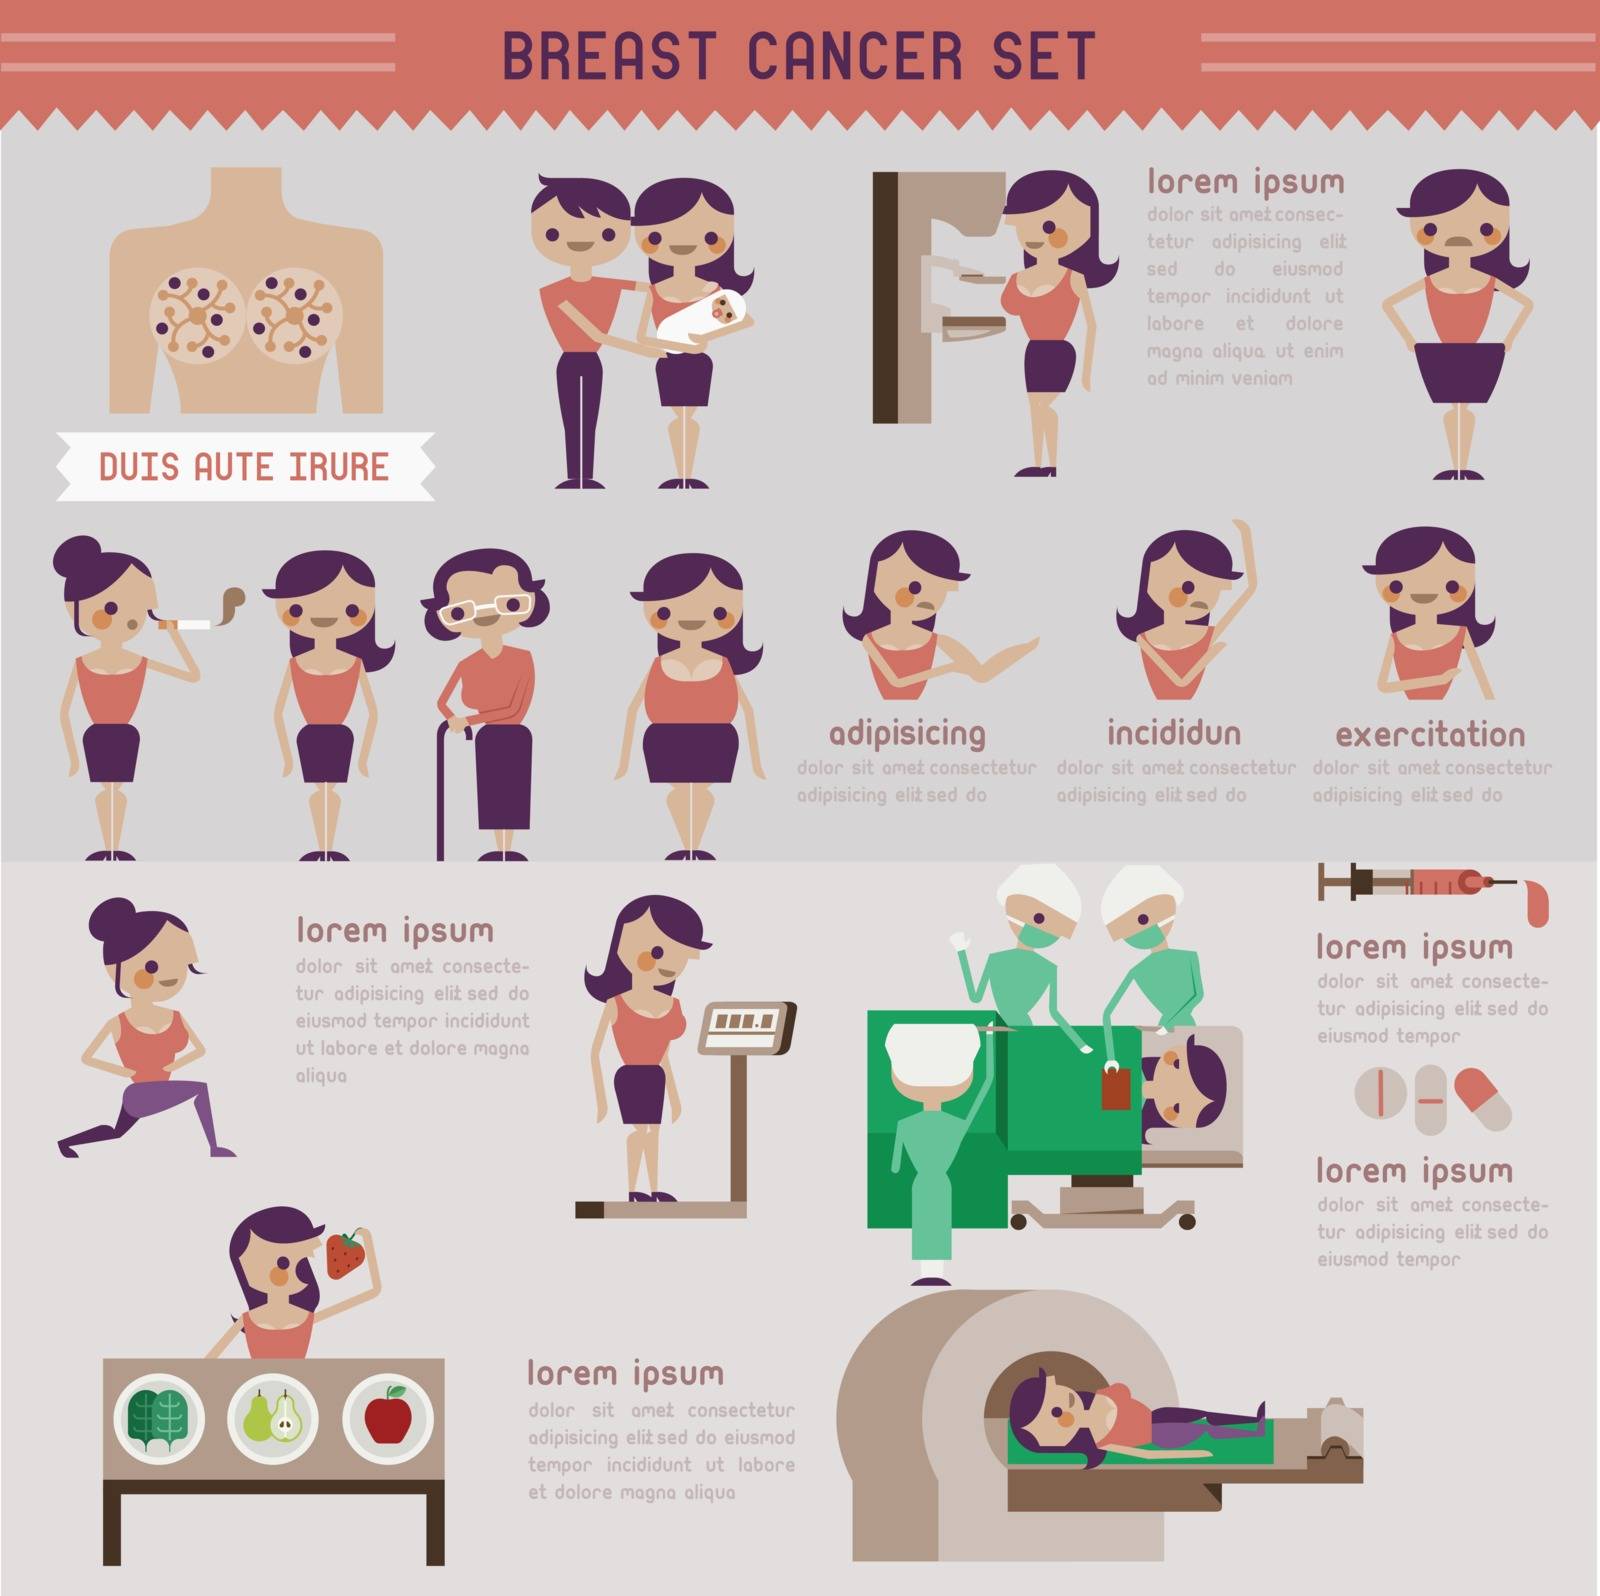 Breast cancer set and info graphic by kninwong